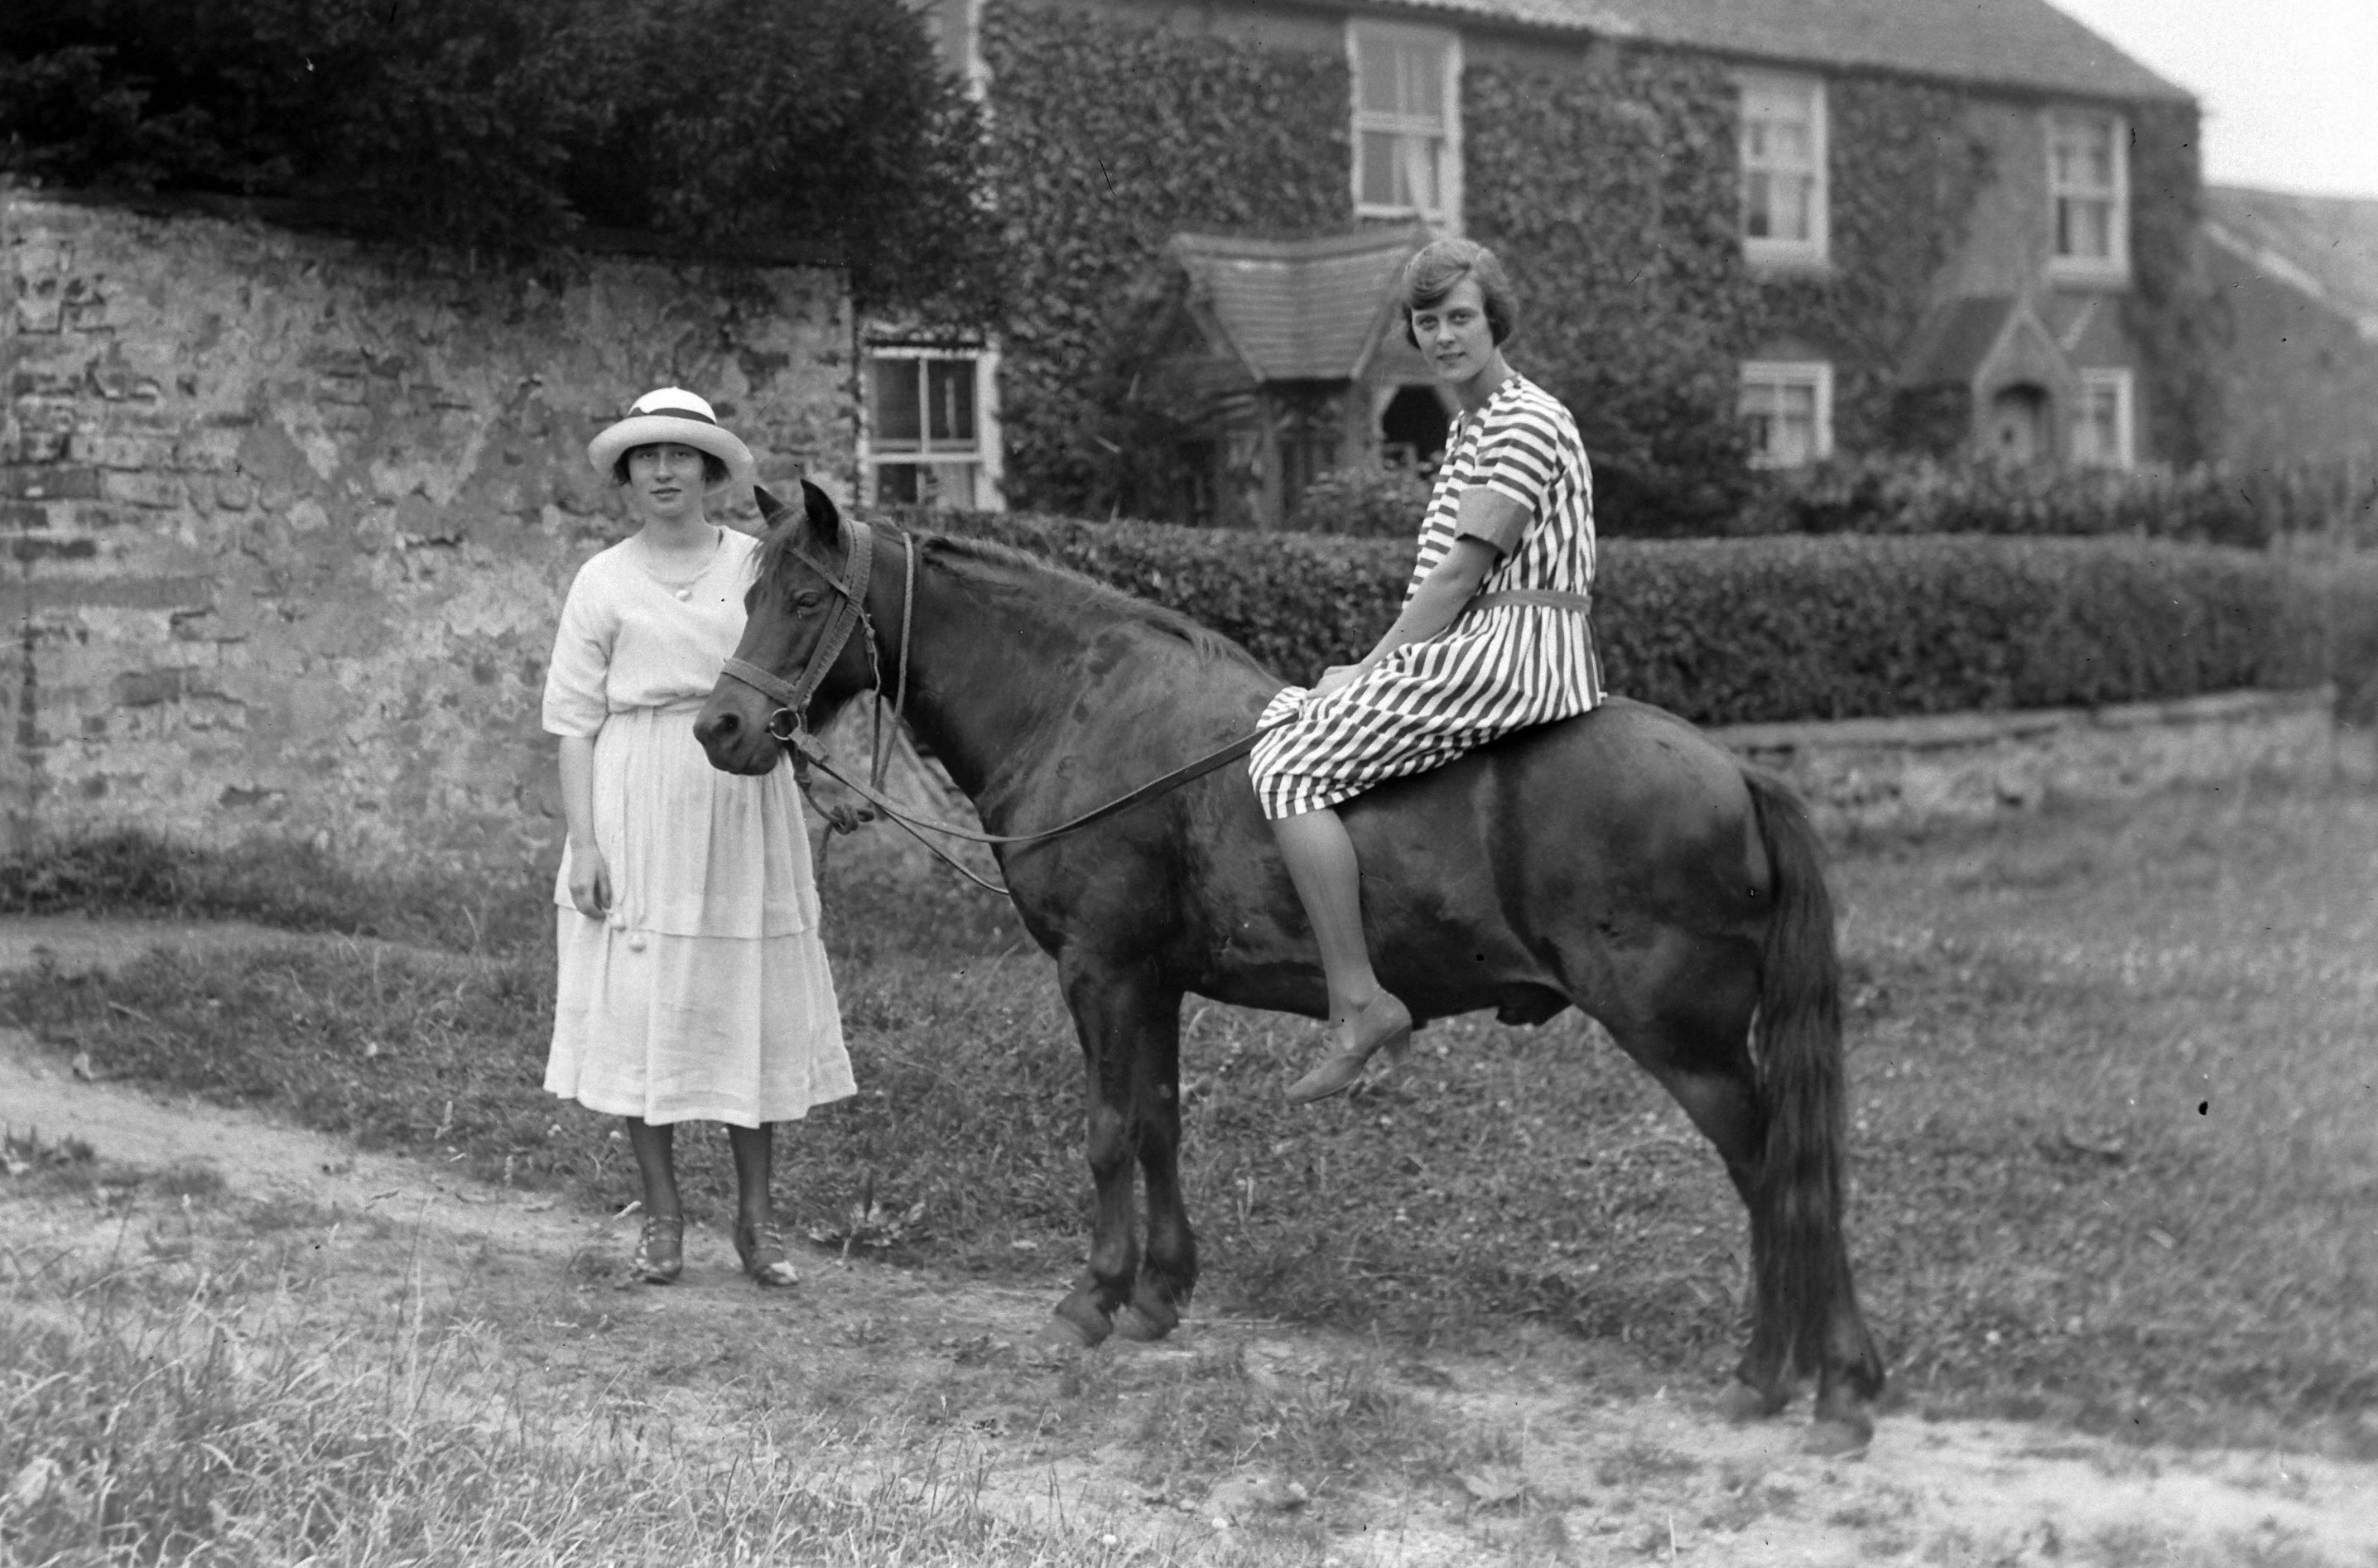 Horse-riding at Grafton, July 1923. From a collection of photographs by local amateur photographer Louisa Kruckenberg.